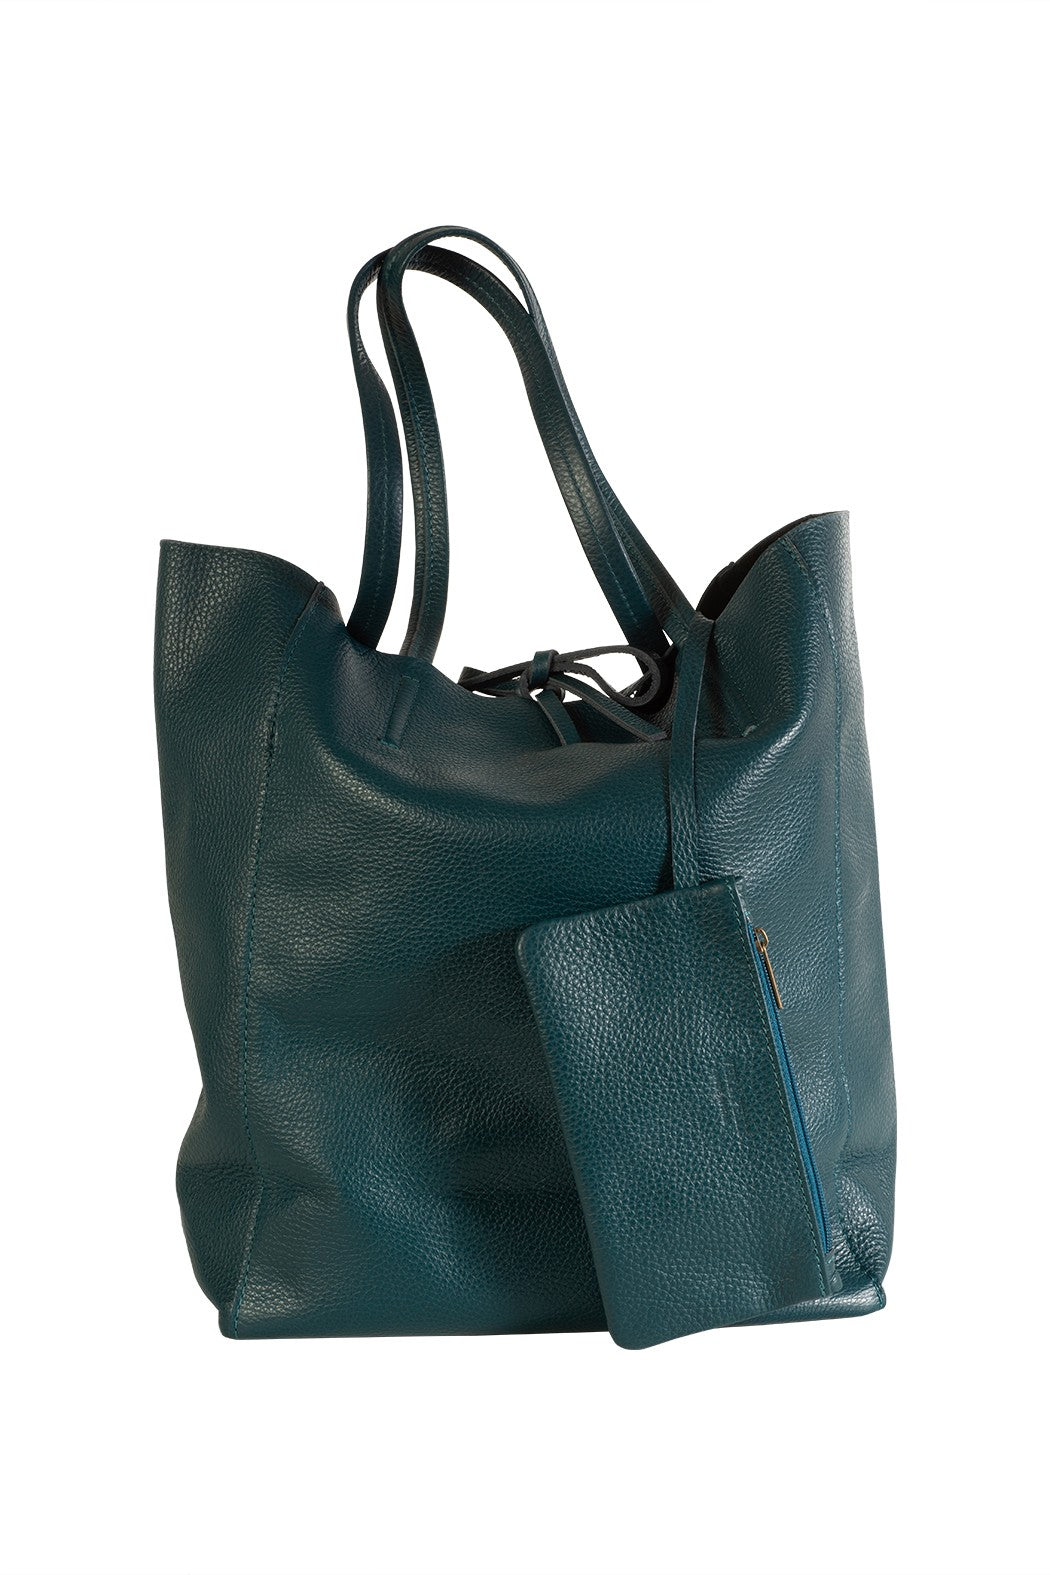 Italian leather shopper tote bag tie top teal with attached internal wallet pouch